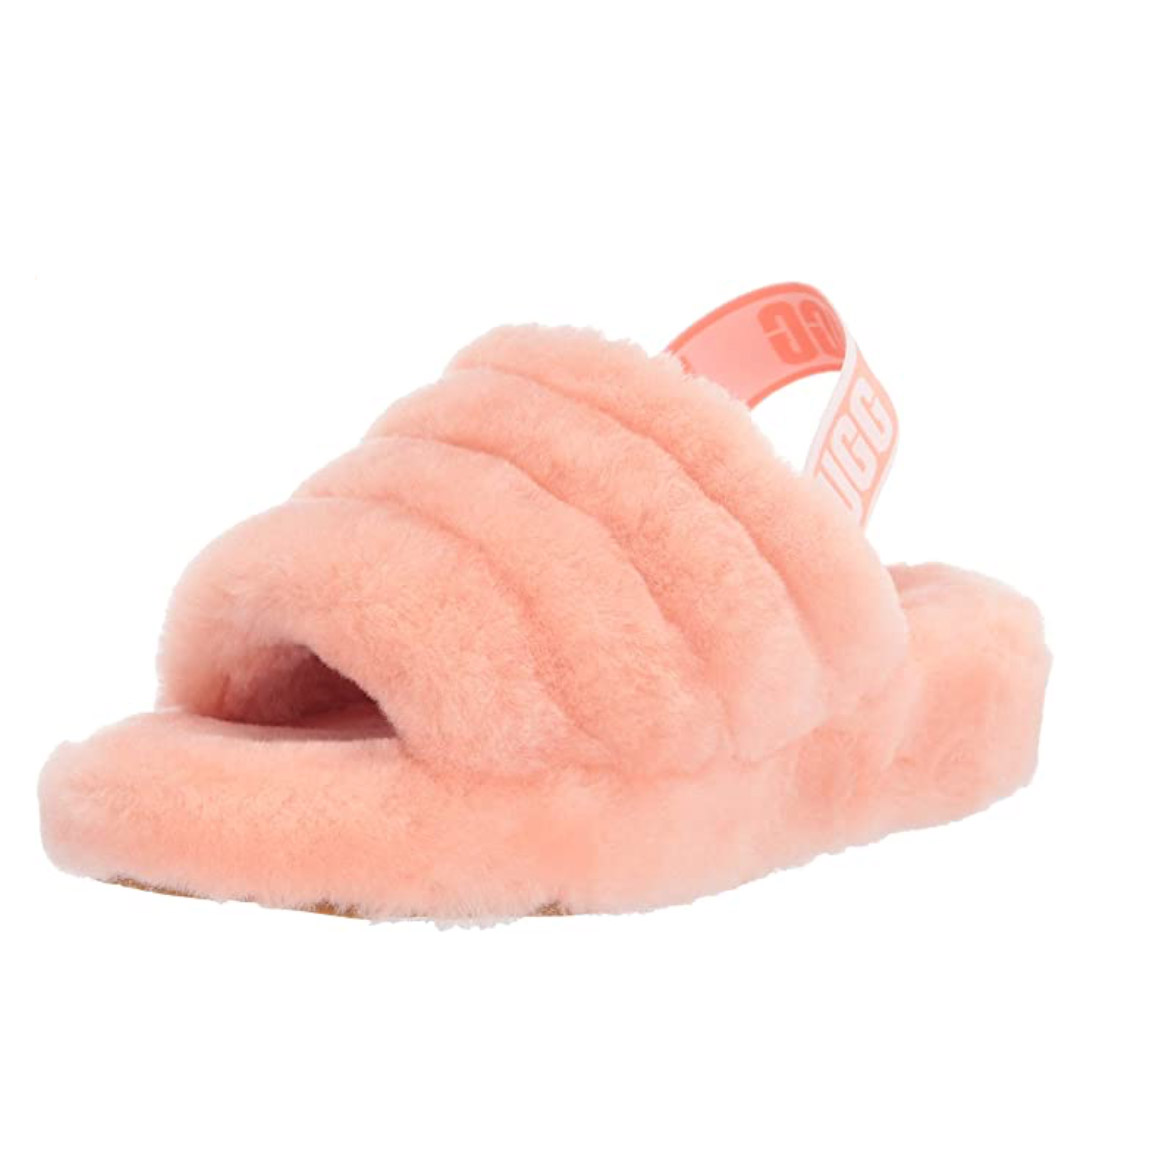 valentine's day gift guide ugg slippers pink cute comfy